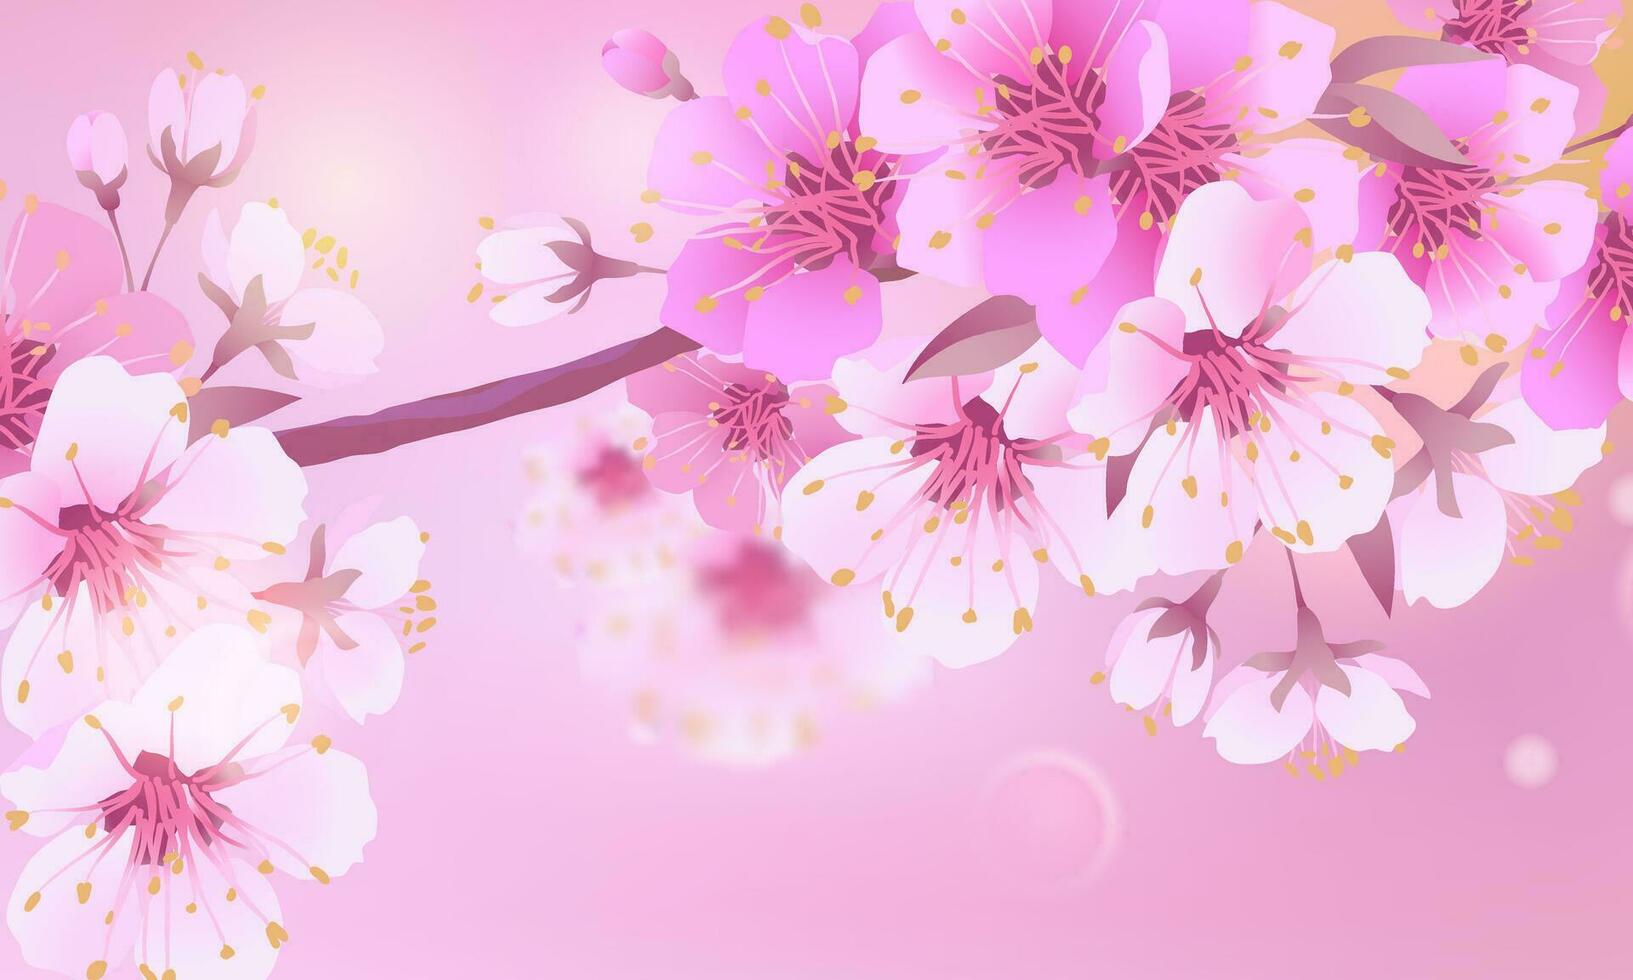 Branches of cherry blossoms on a soft light pink background. For Easter and spring cards with space for text. Floral spring abstract nature background. Branches with pink flowers. vector